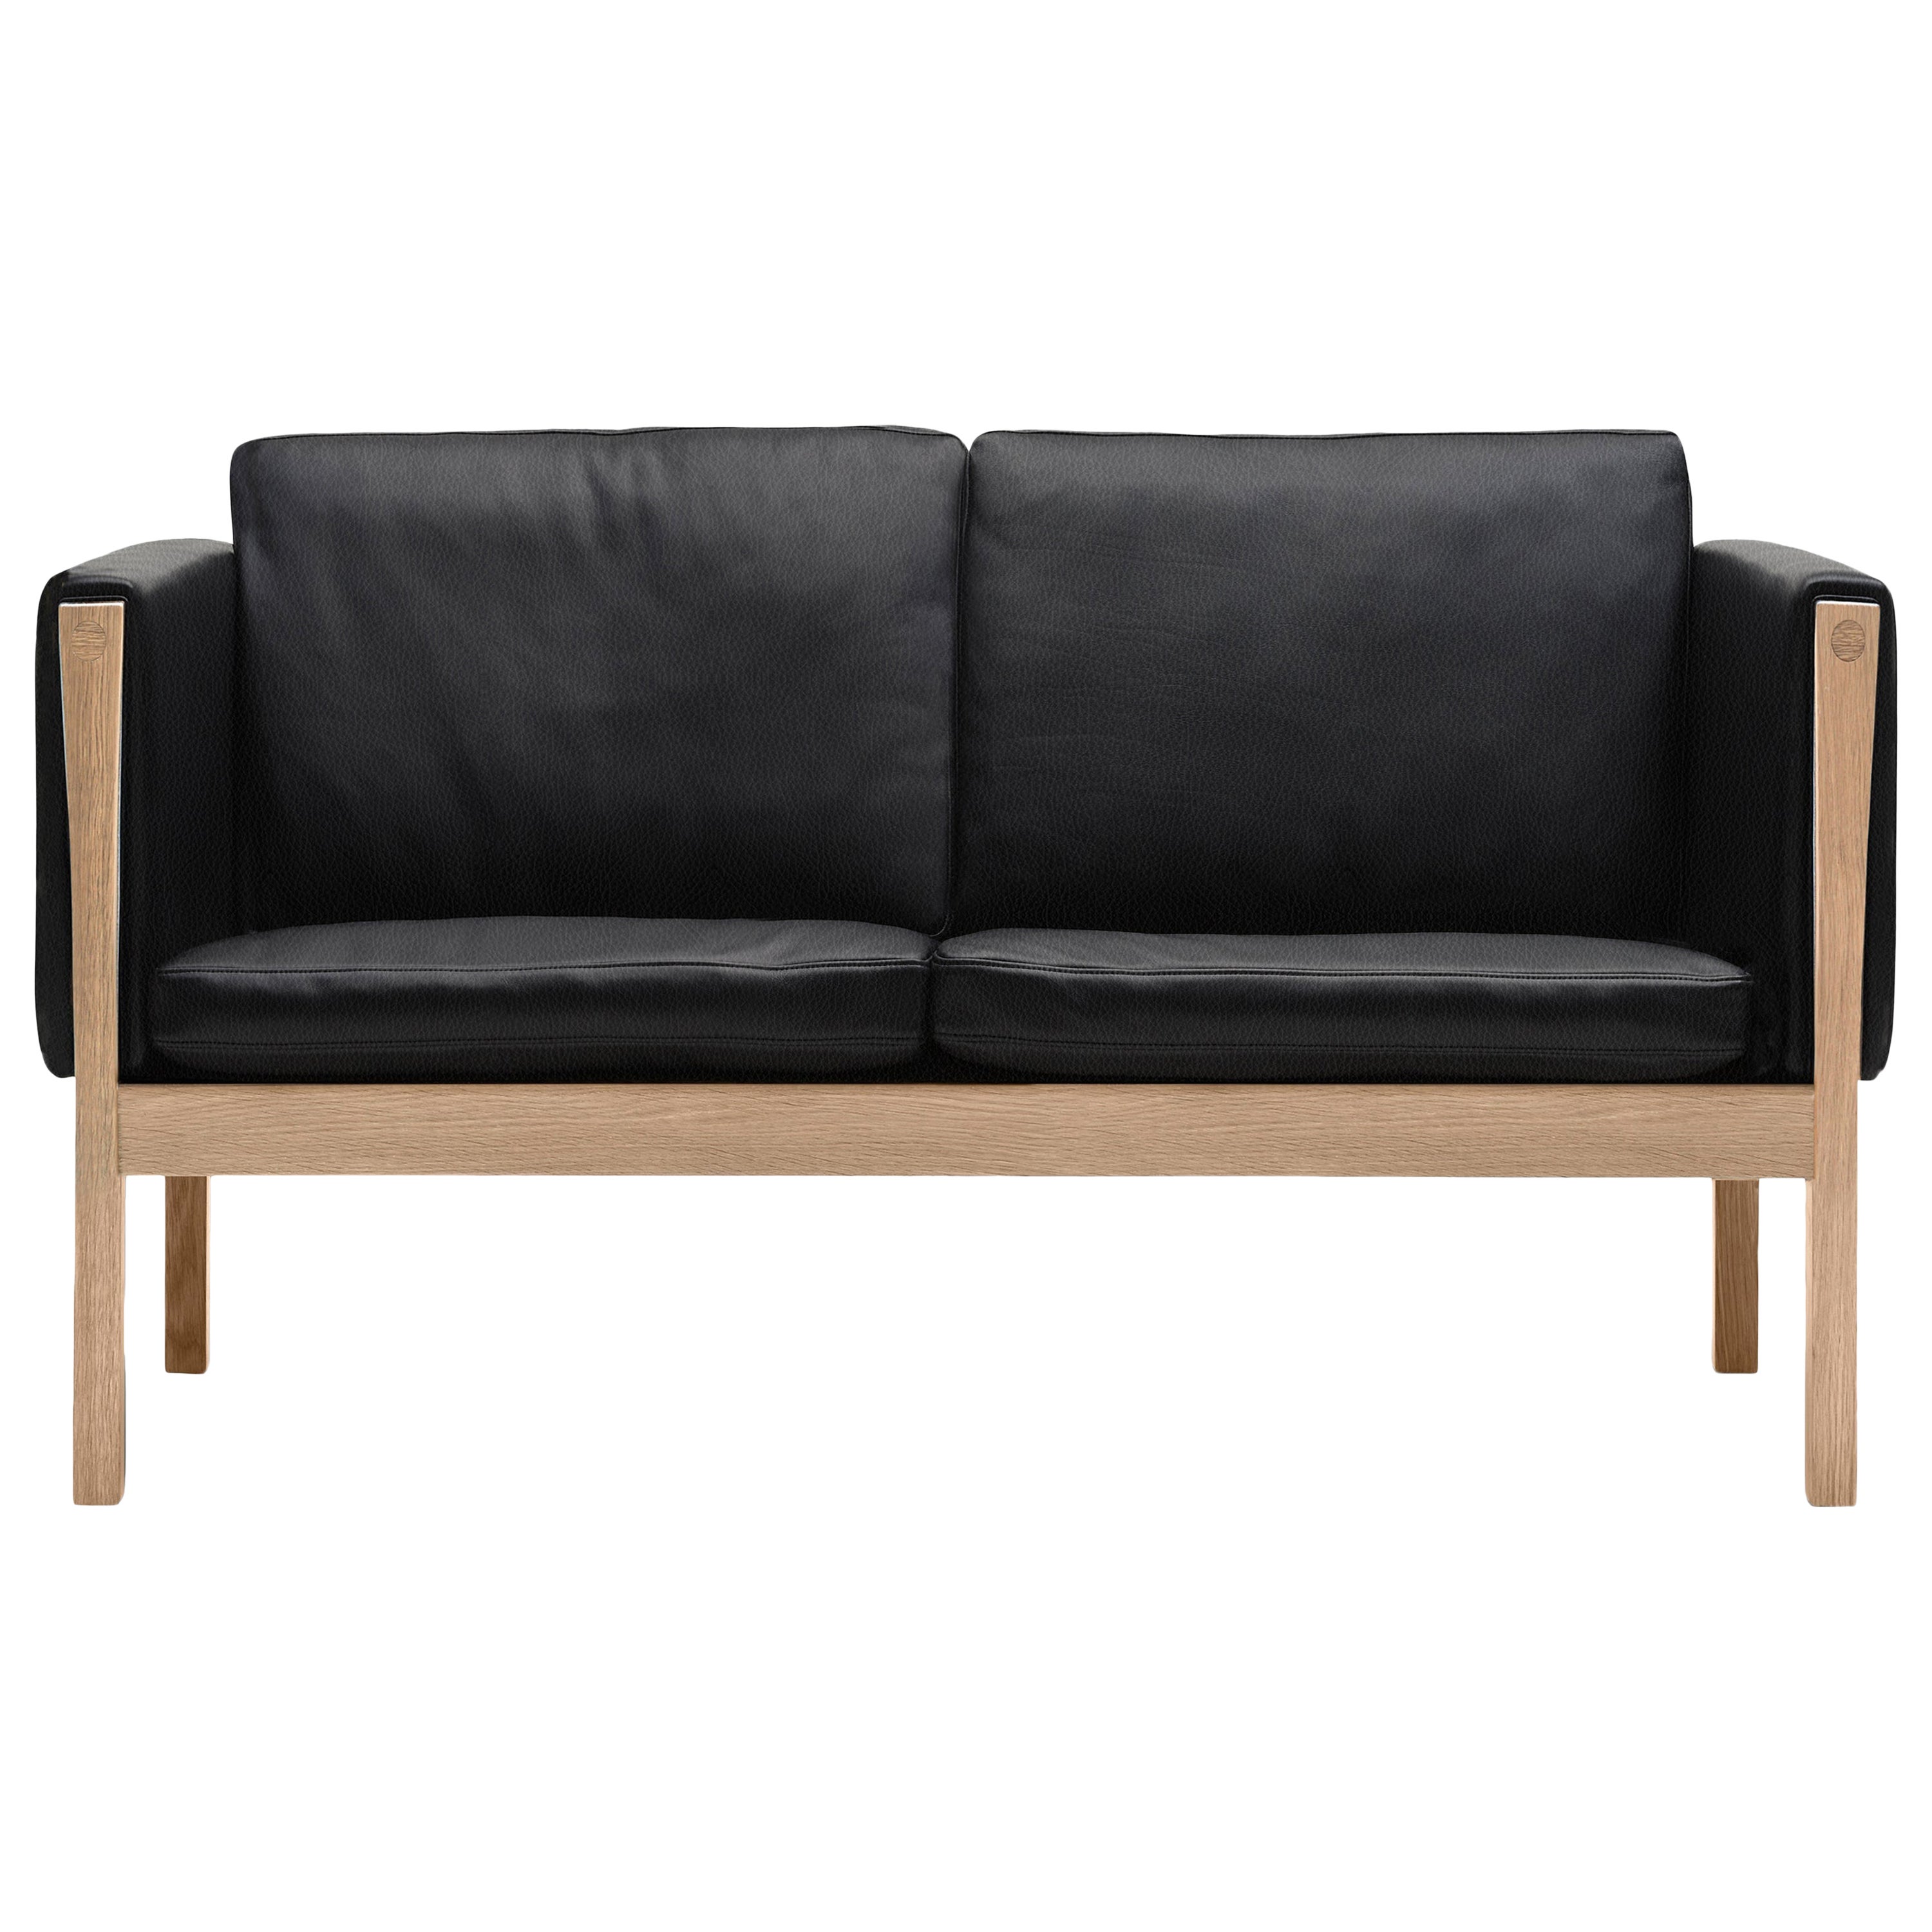 Ch162 Sofa in Oiled Oak Frame with Leather Upholstery by Hans J. Wegner